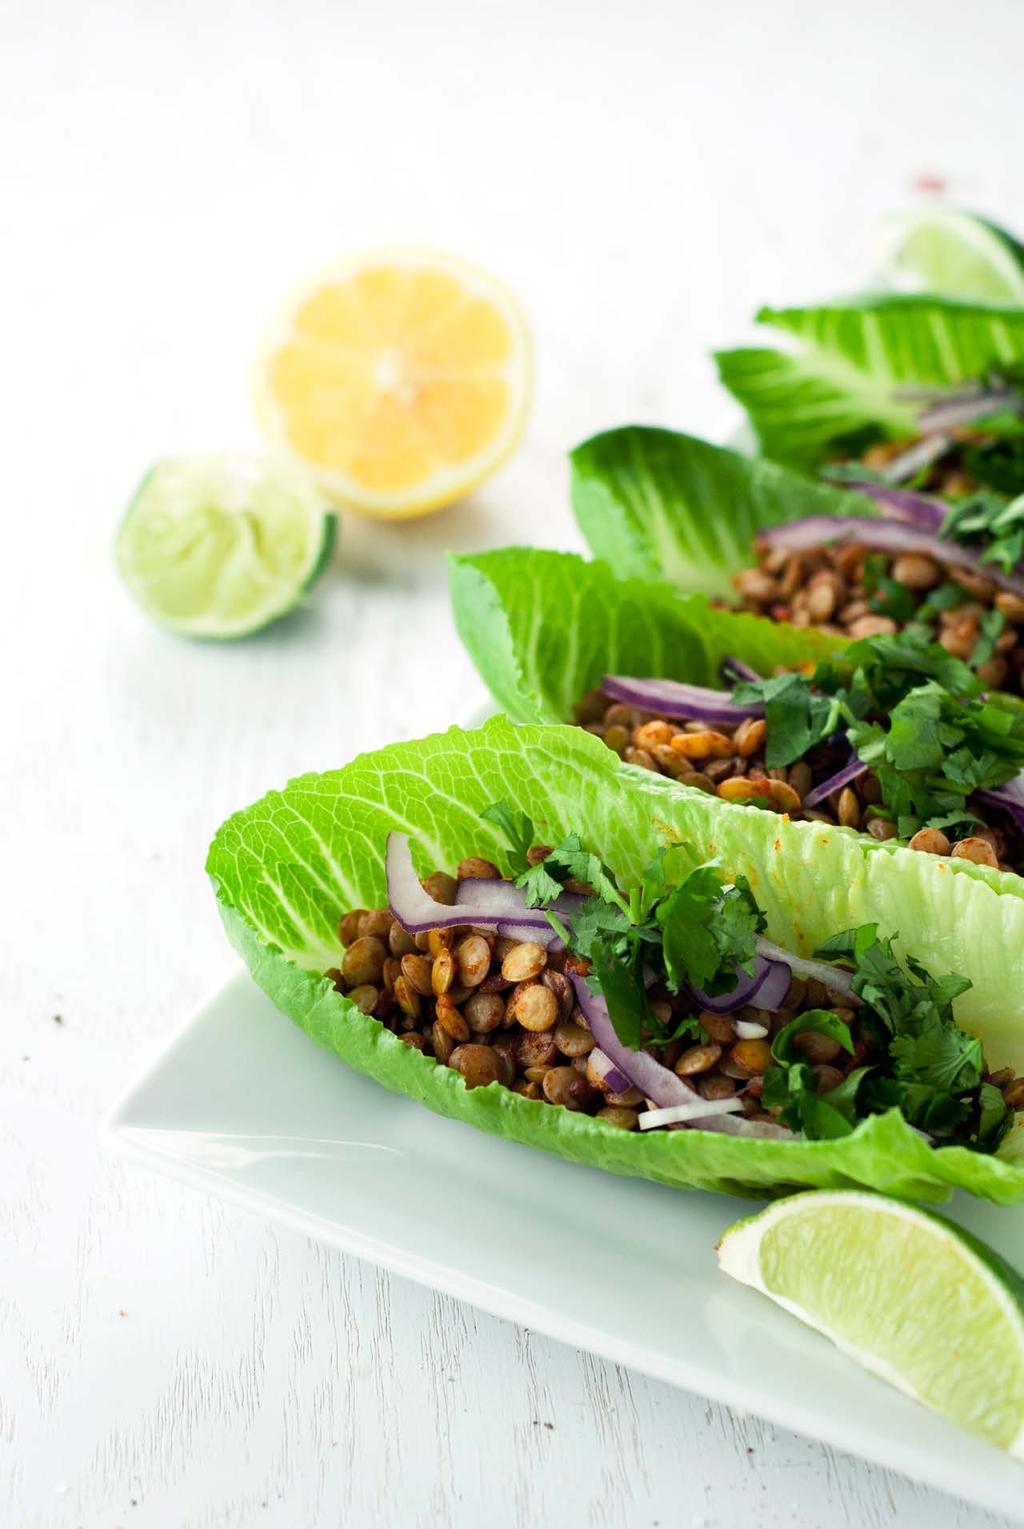 14. 5-Min Lentil Street Tacos Using pre-cooked lentils makes this meal a super fast lunch, with a spicy kick from the taco seasoning, and a hearty crunch from the cool lettuce leaves instead of